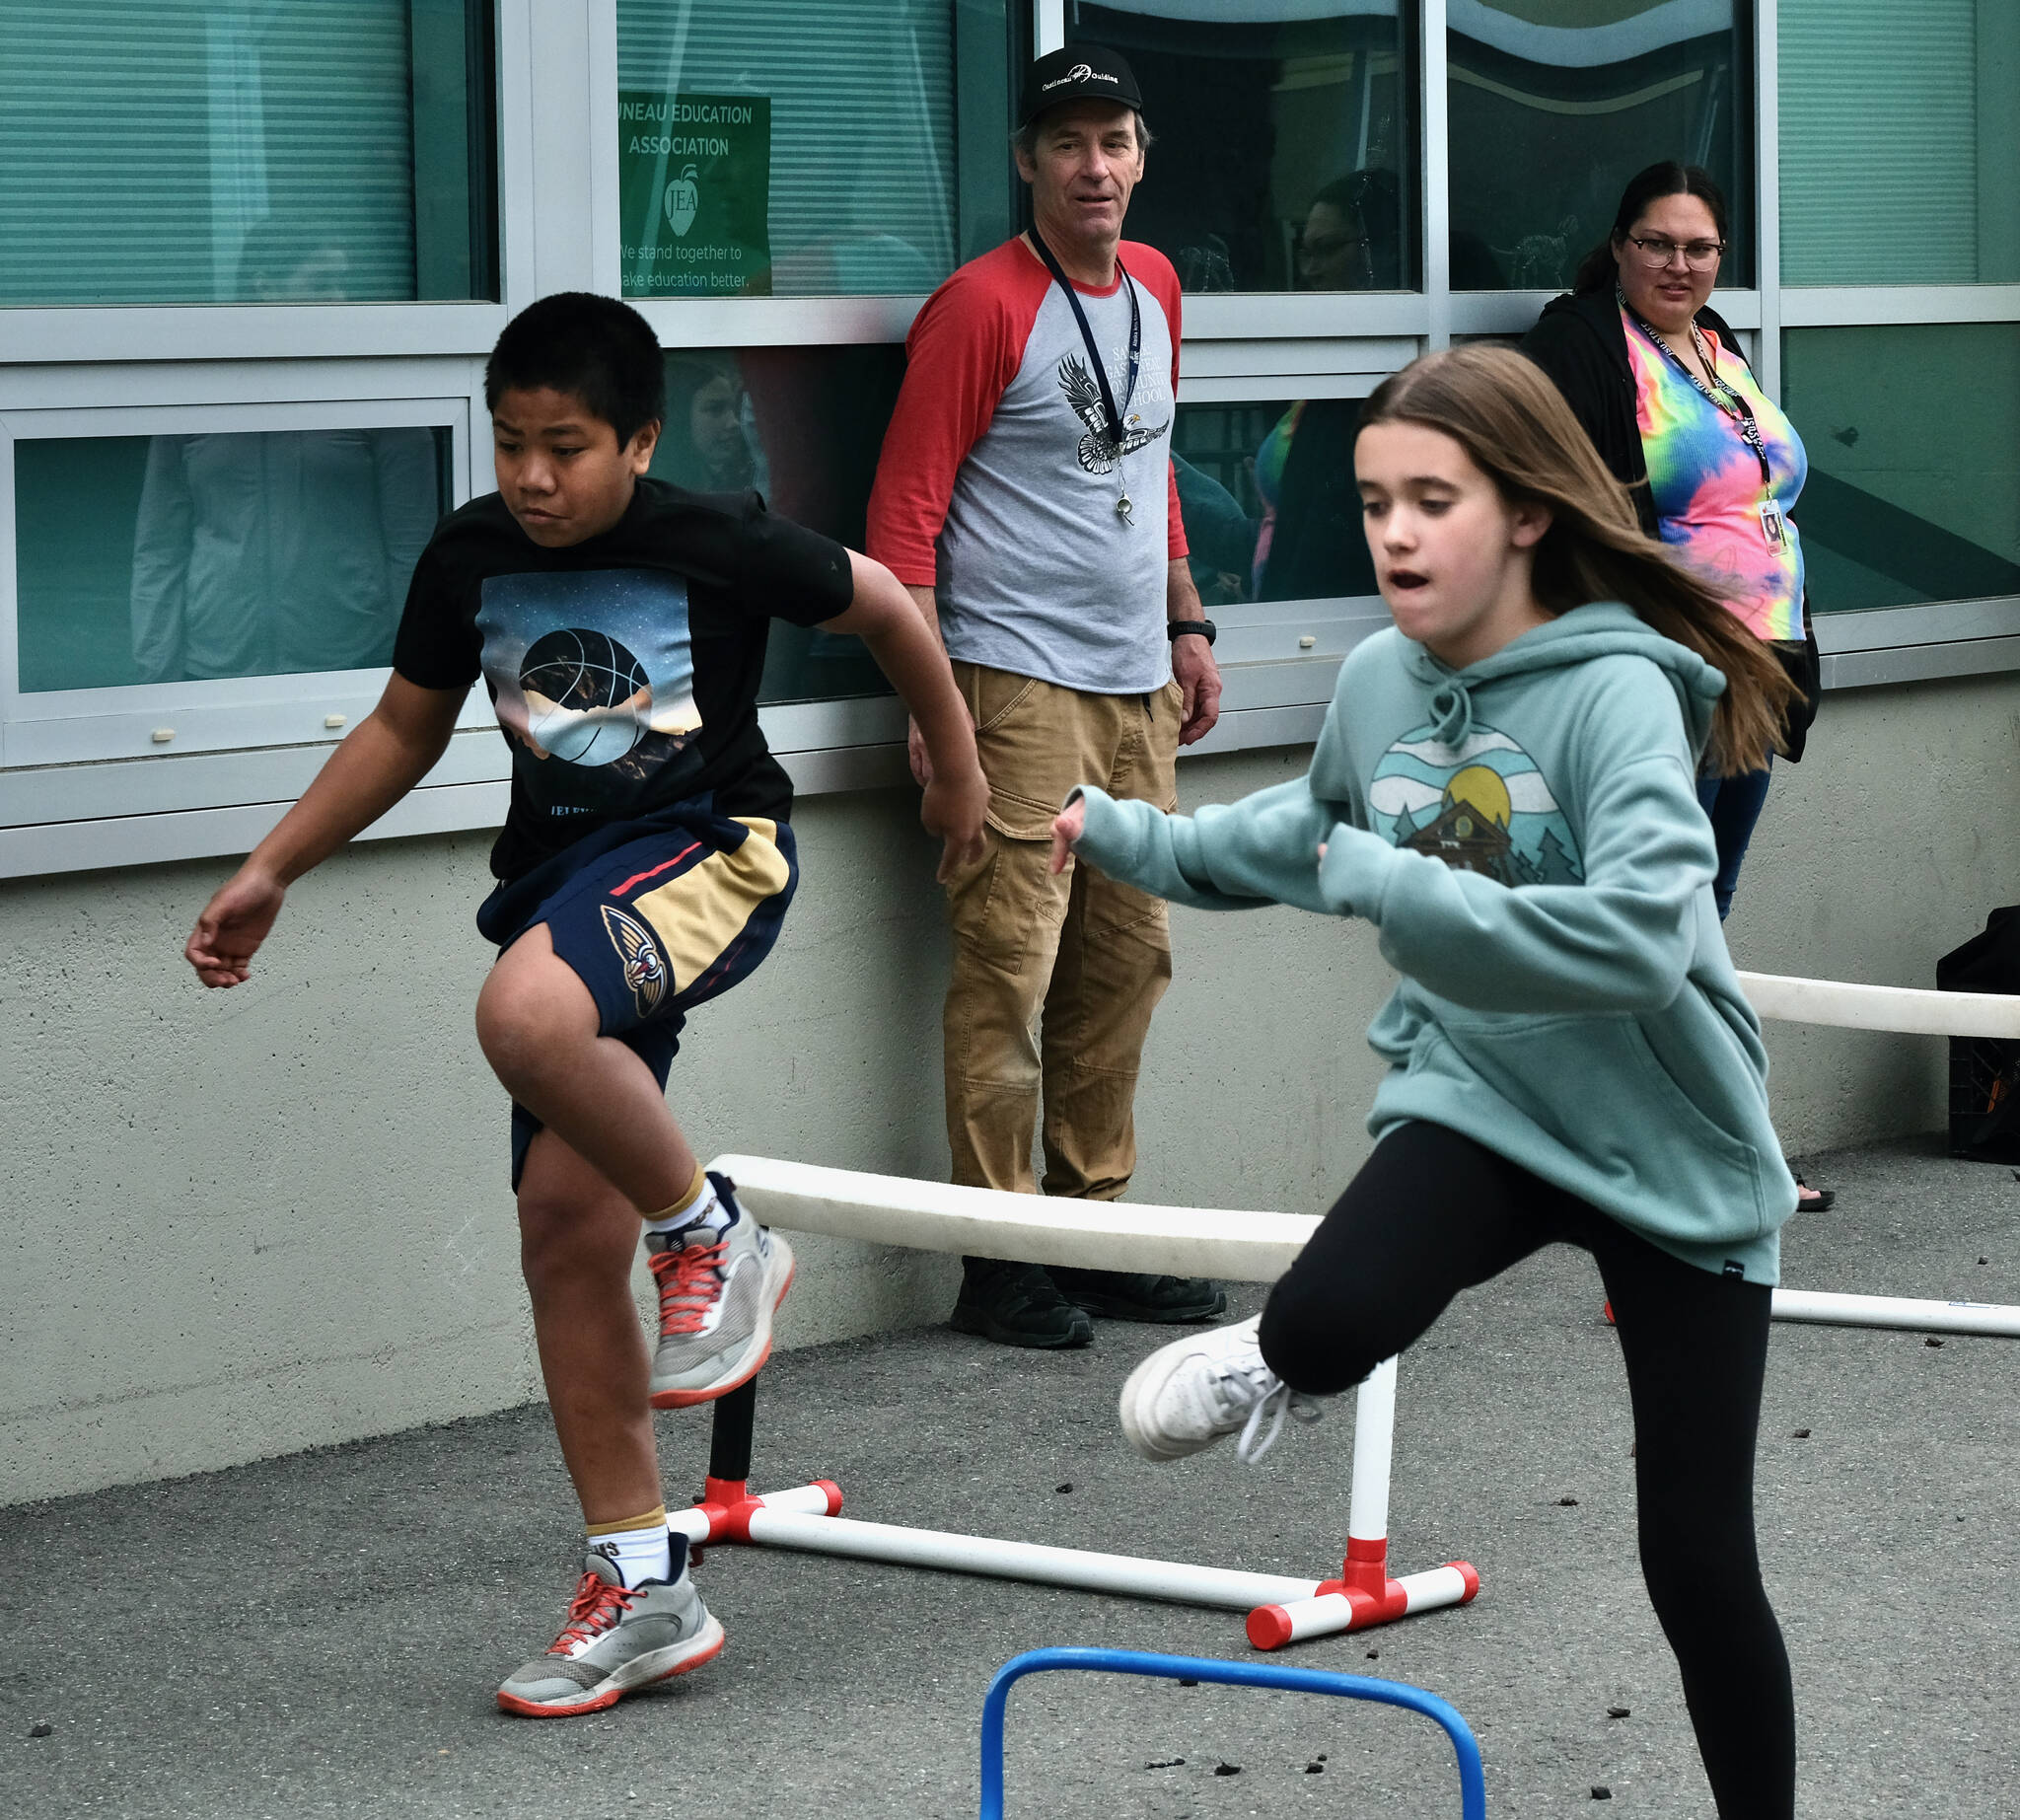 Sayéik: Gastineau Community School physical education teacher Dirk Miller watchs students William Olmstead and Allie Simonson clear hurdles during Field Day at the school on Thursday. Miller is retiring after 24 years at the school. (Klas Stolpe / Juneau Empire)